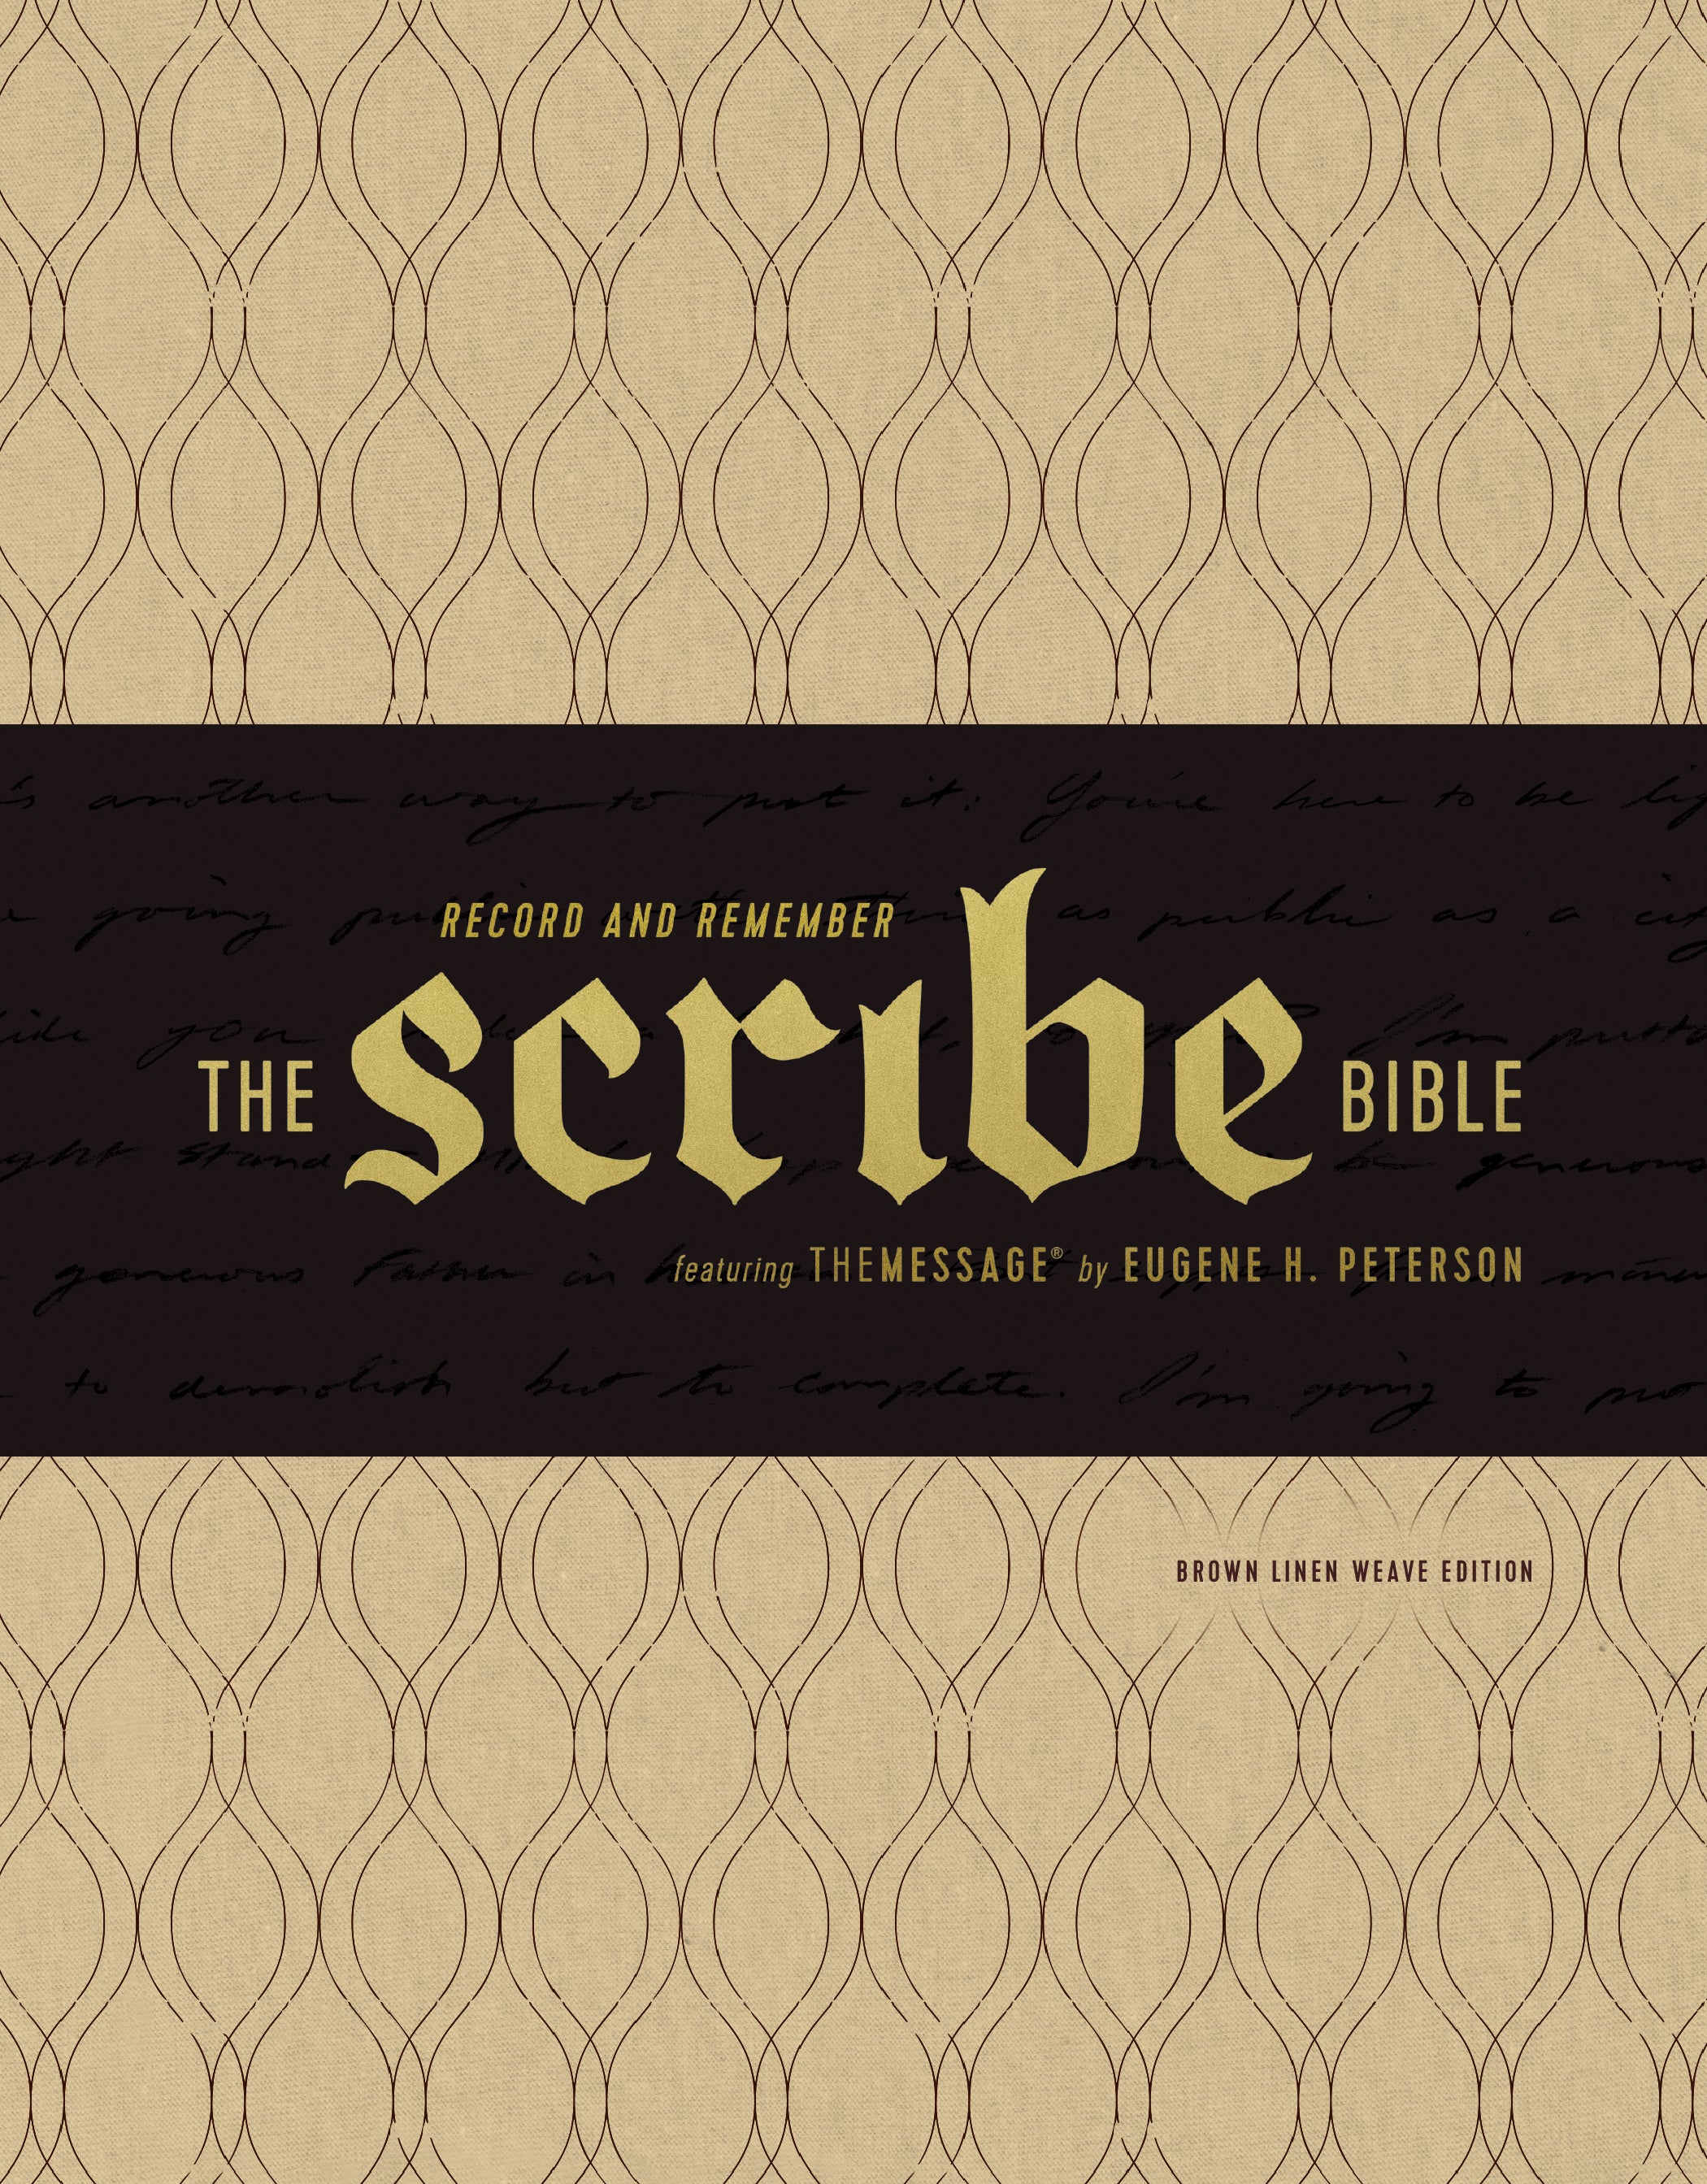 Image of The Scribe Bible other